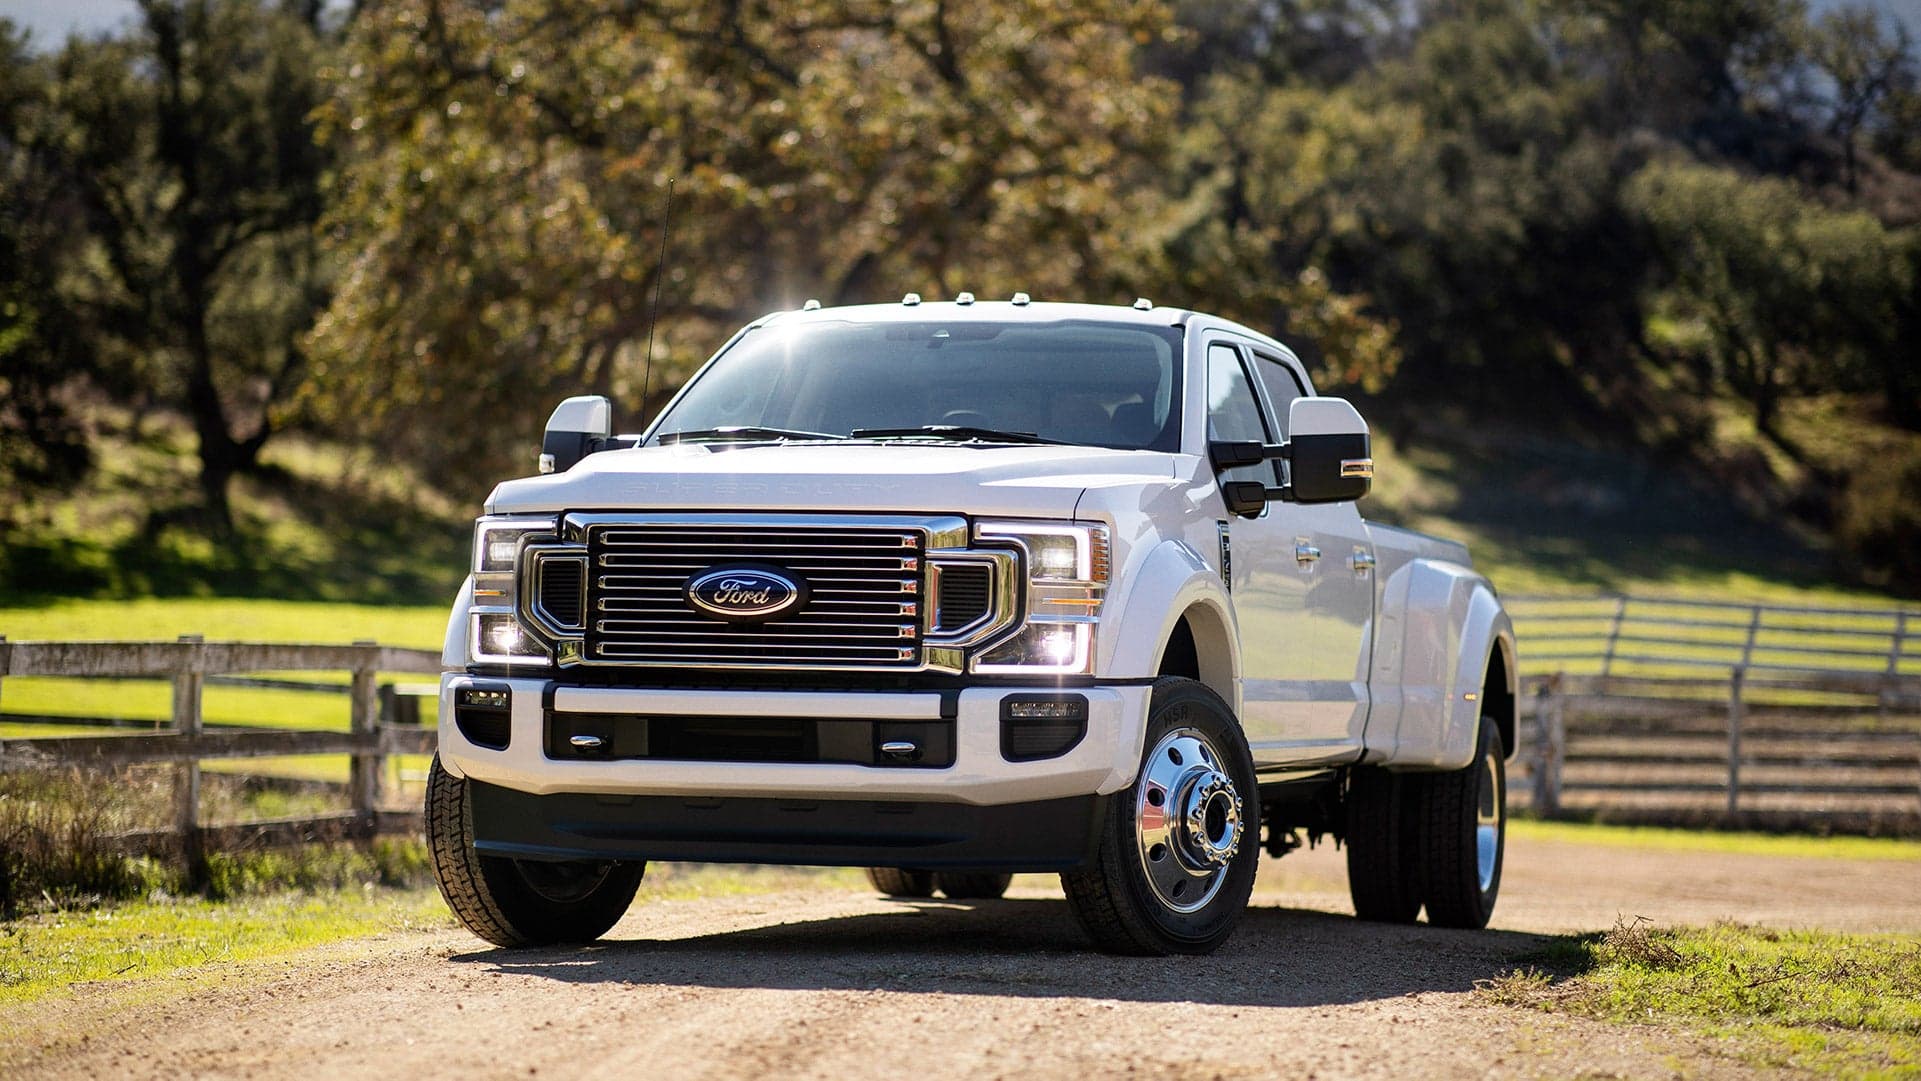 2020 Ford Super Duty Equipped With 7.3-L V8 Is the Most Powerful Heavy Duty Pickup Truck